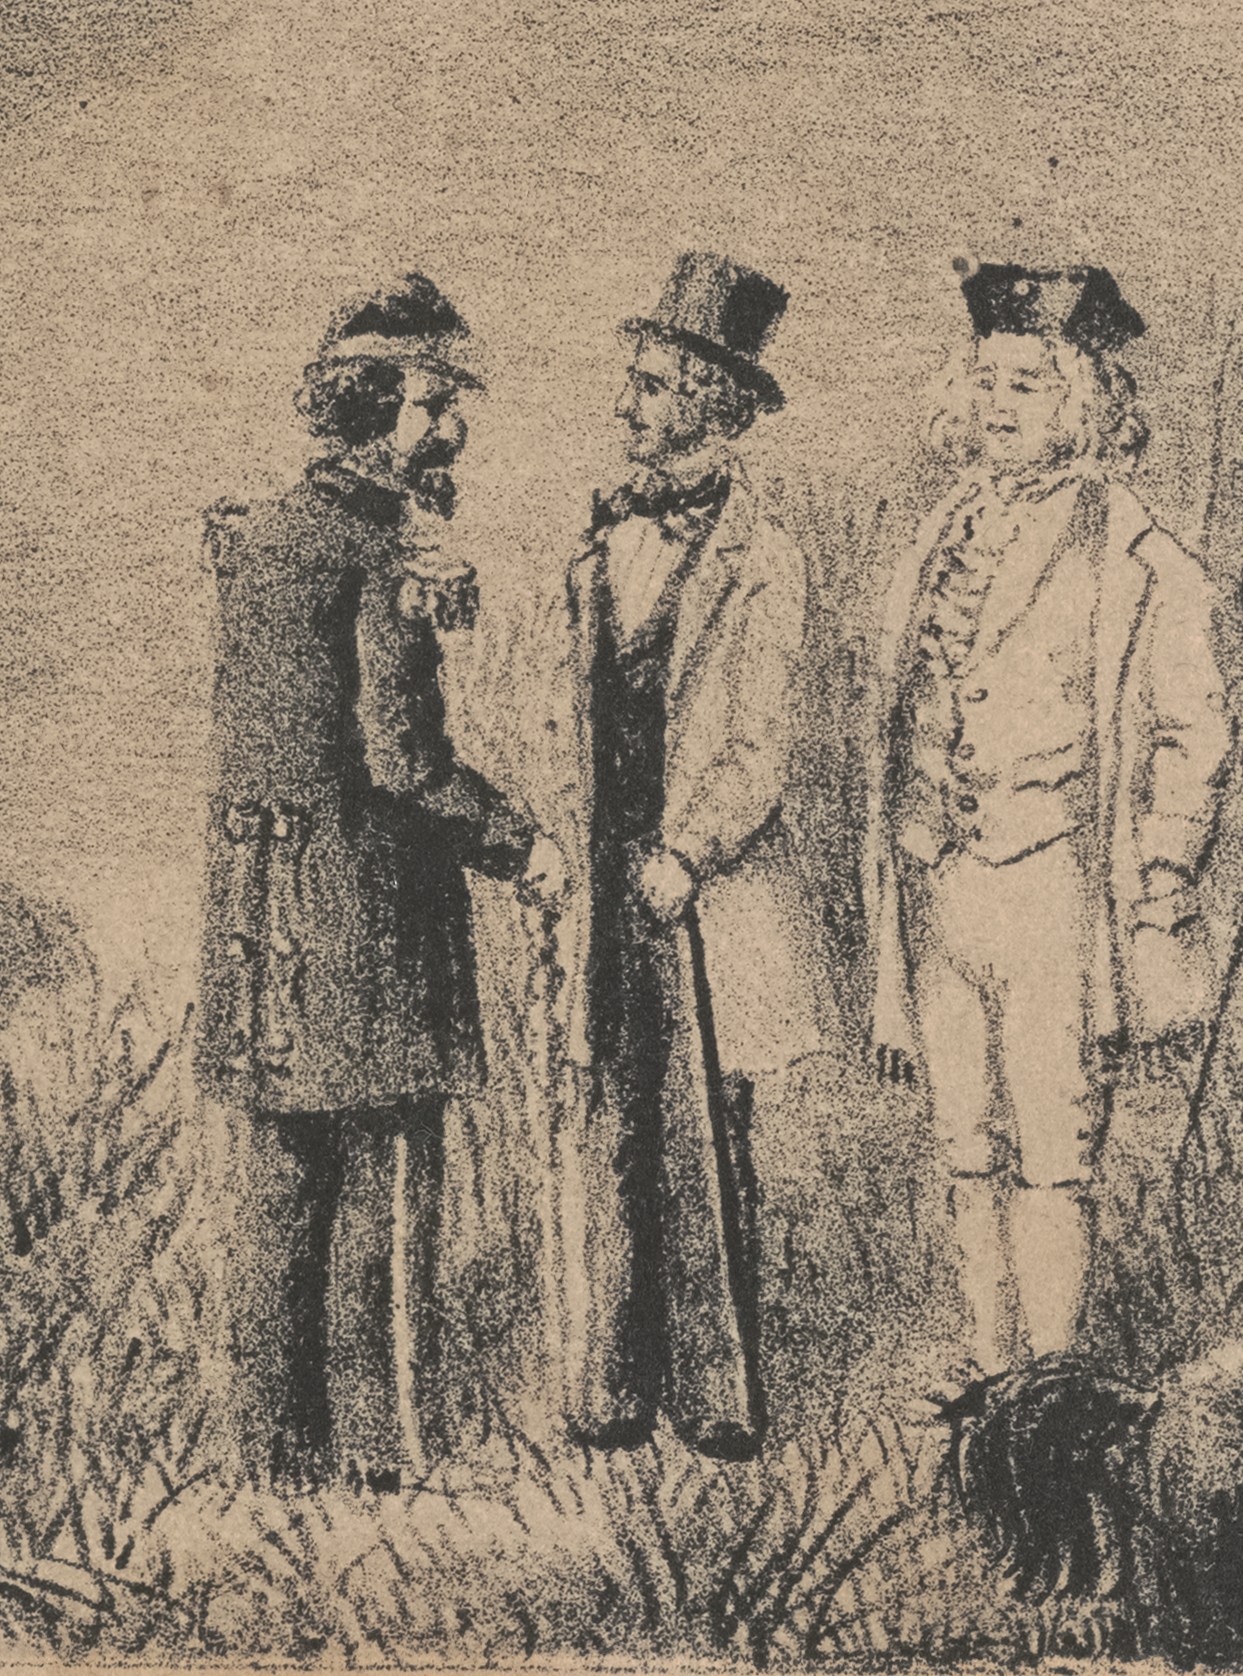   Detail from lithograph of  First Annual Encampment of the Second Bridge C.M.; Brigadier General Ellis, Commanding; Reviewed by His Excellency Gov. Stanford; Brigade Drill and Shamfight Oct. 14th 1863  (1863), by T. Grob.&nbsp; Stanford University A